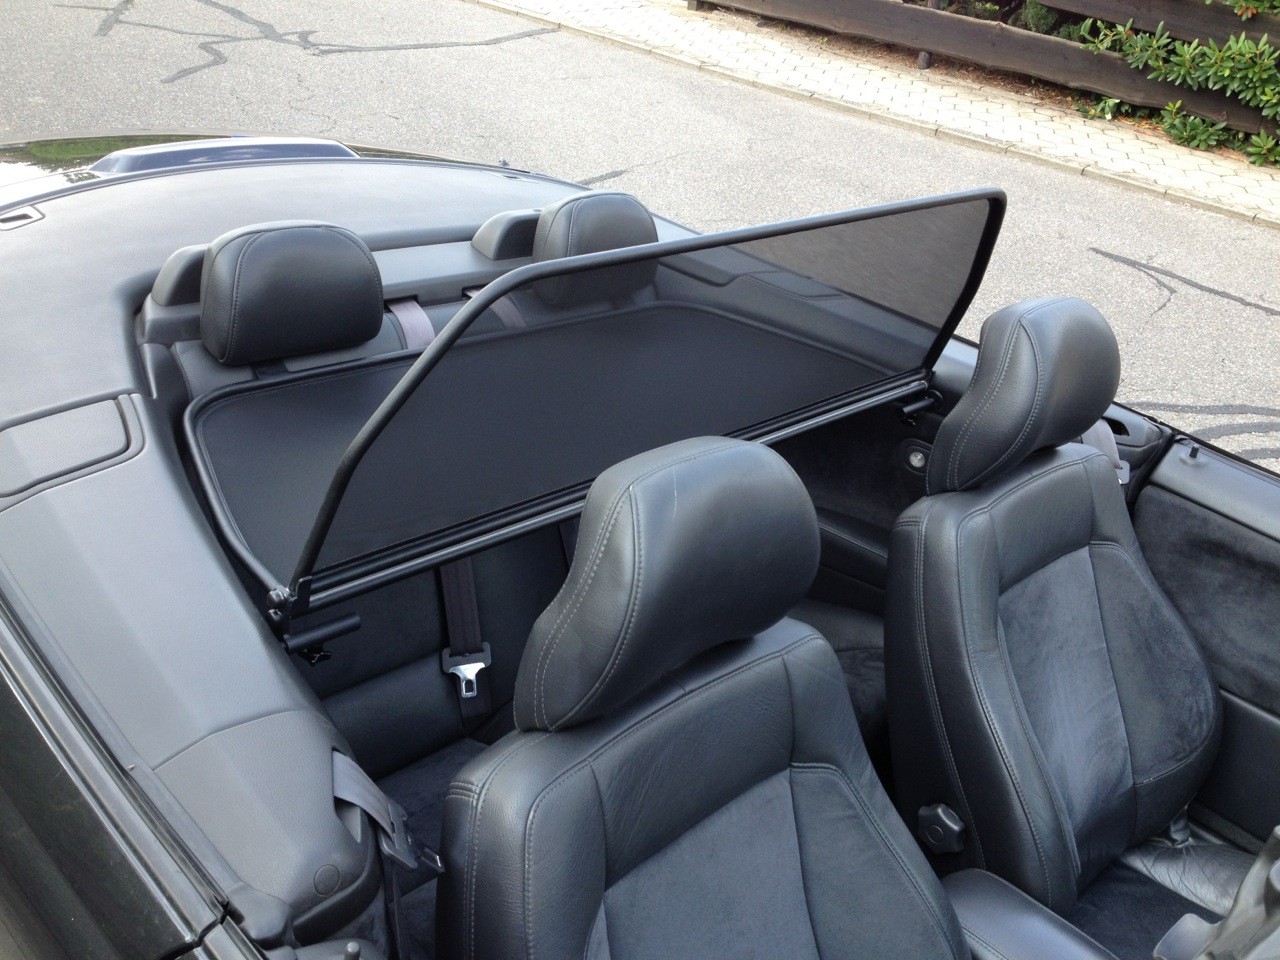 Airax wind deflector suitable for Volvo C70 Typ N 